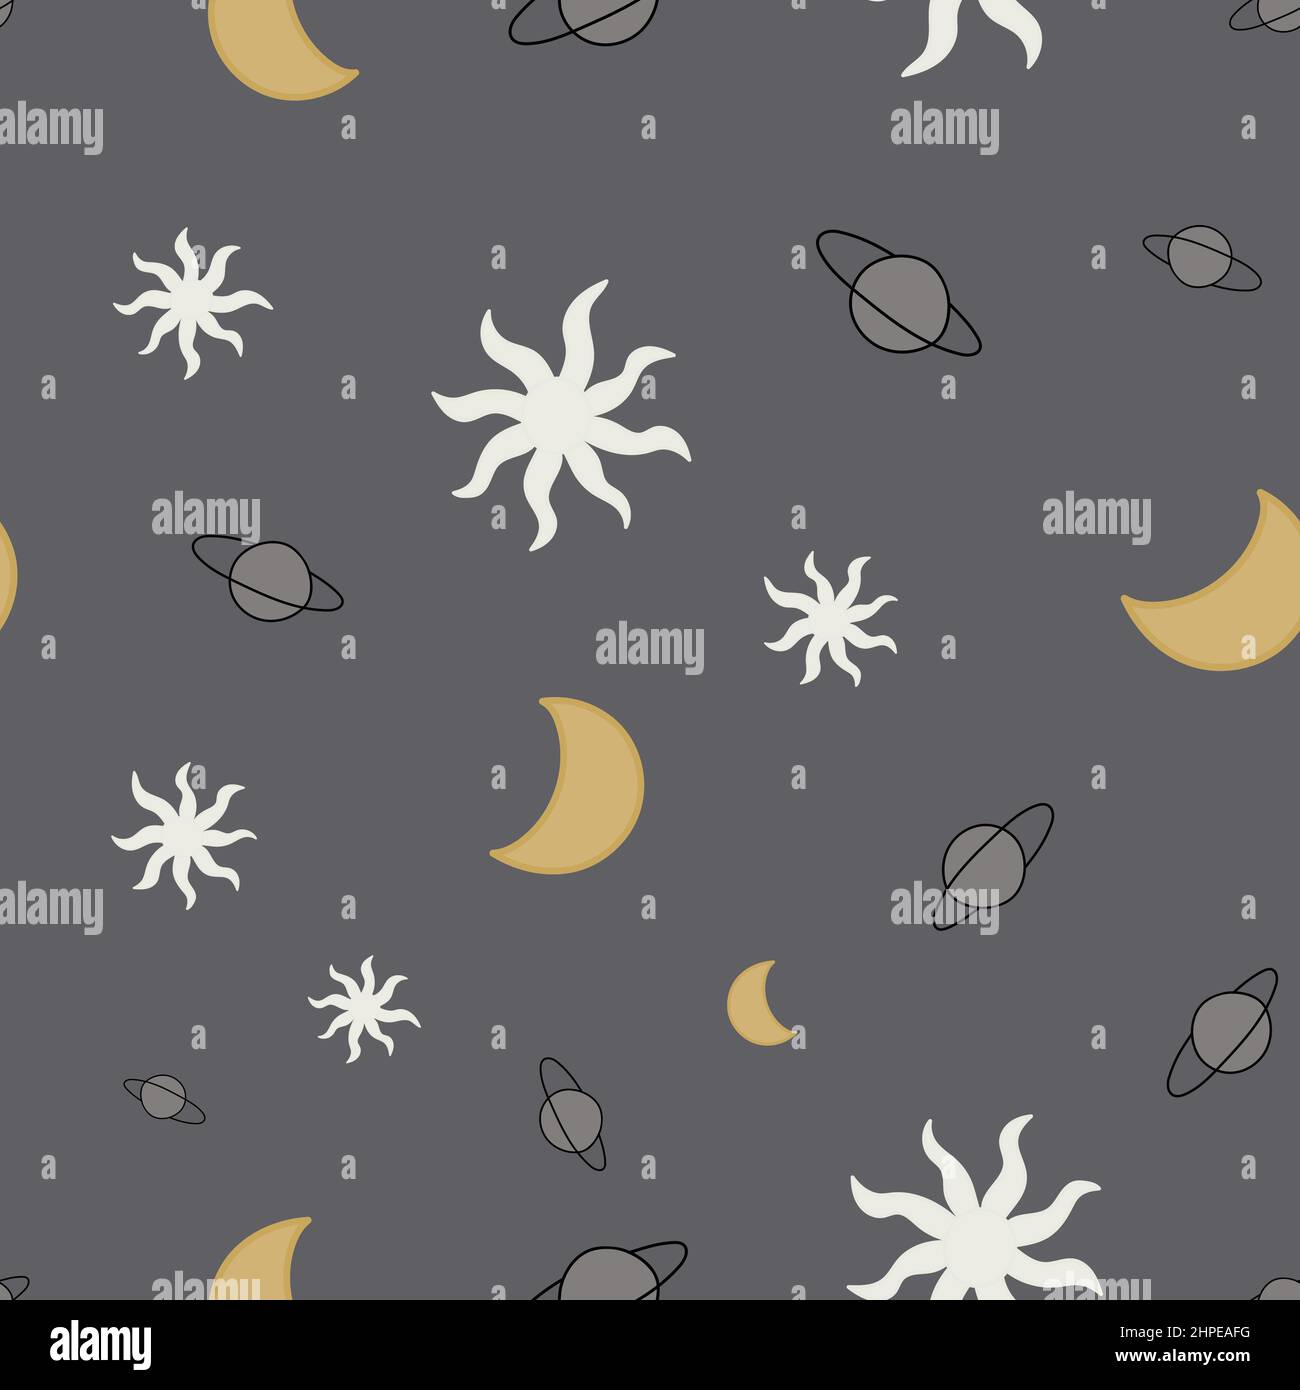 Seamless pattern with hand drawn doodle line art celestial bodies